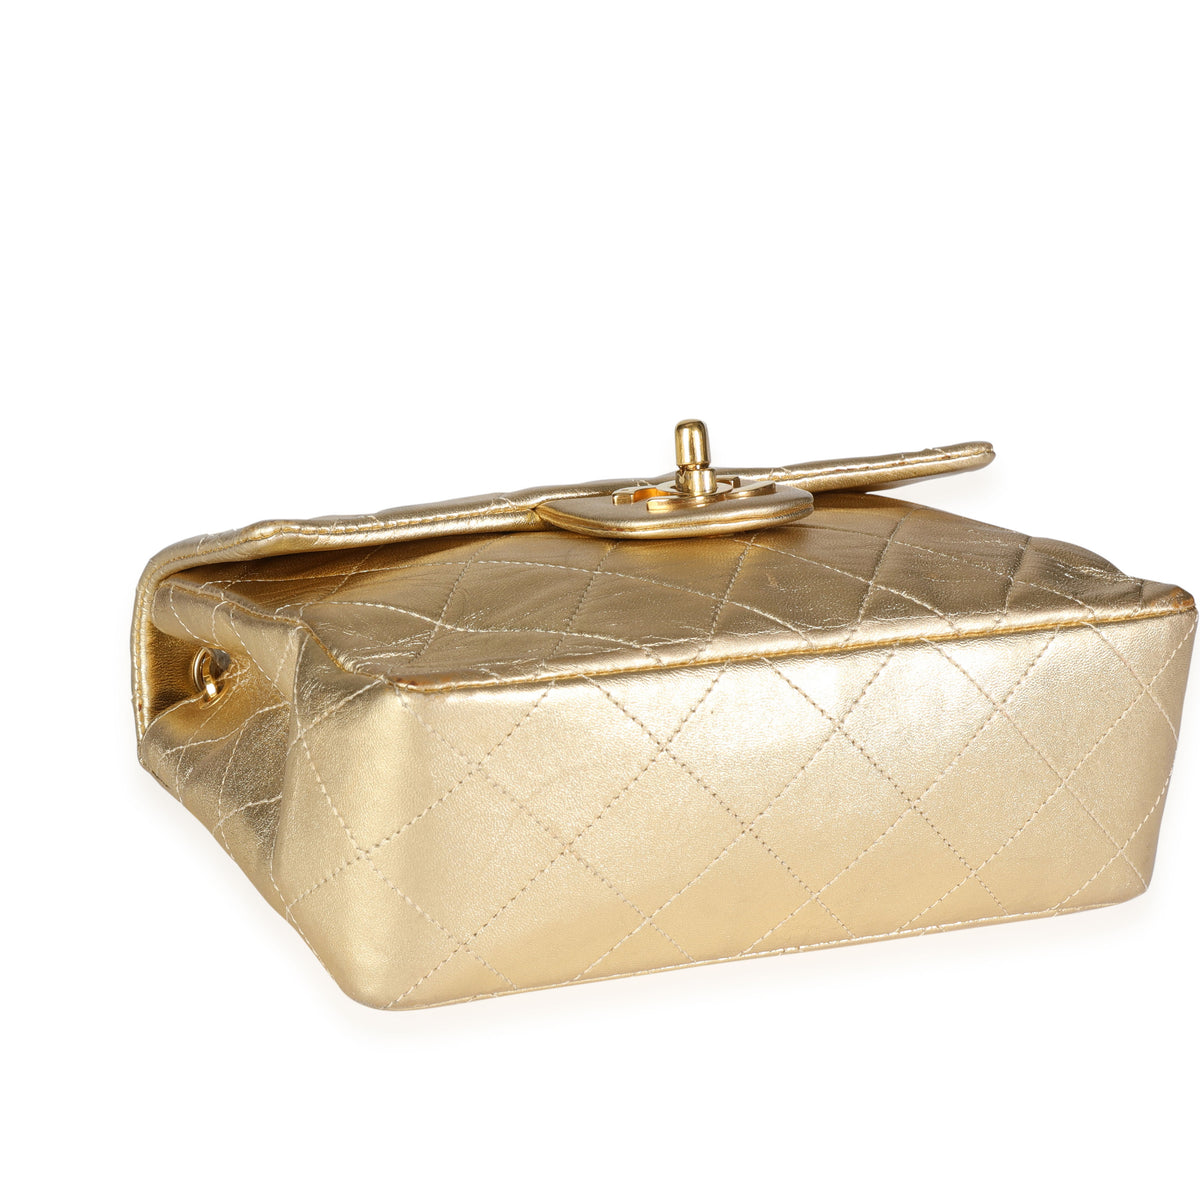 CHANEL VINTAGE MINI GOLD SILVER QUILTED KELLY BAG